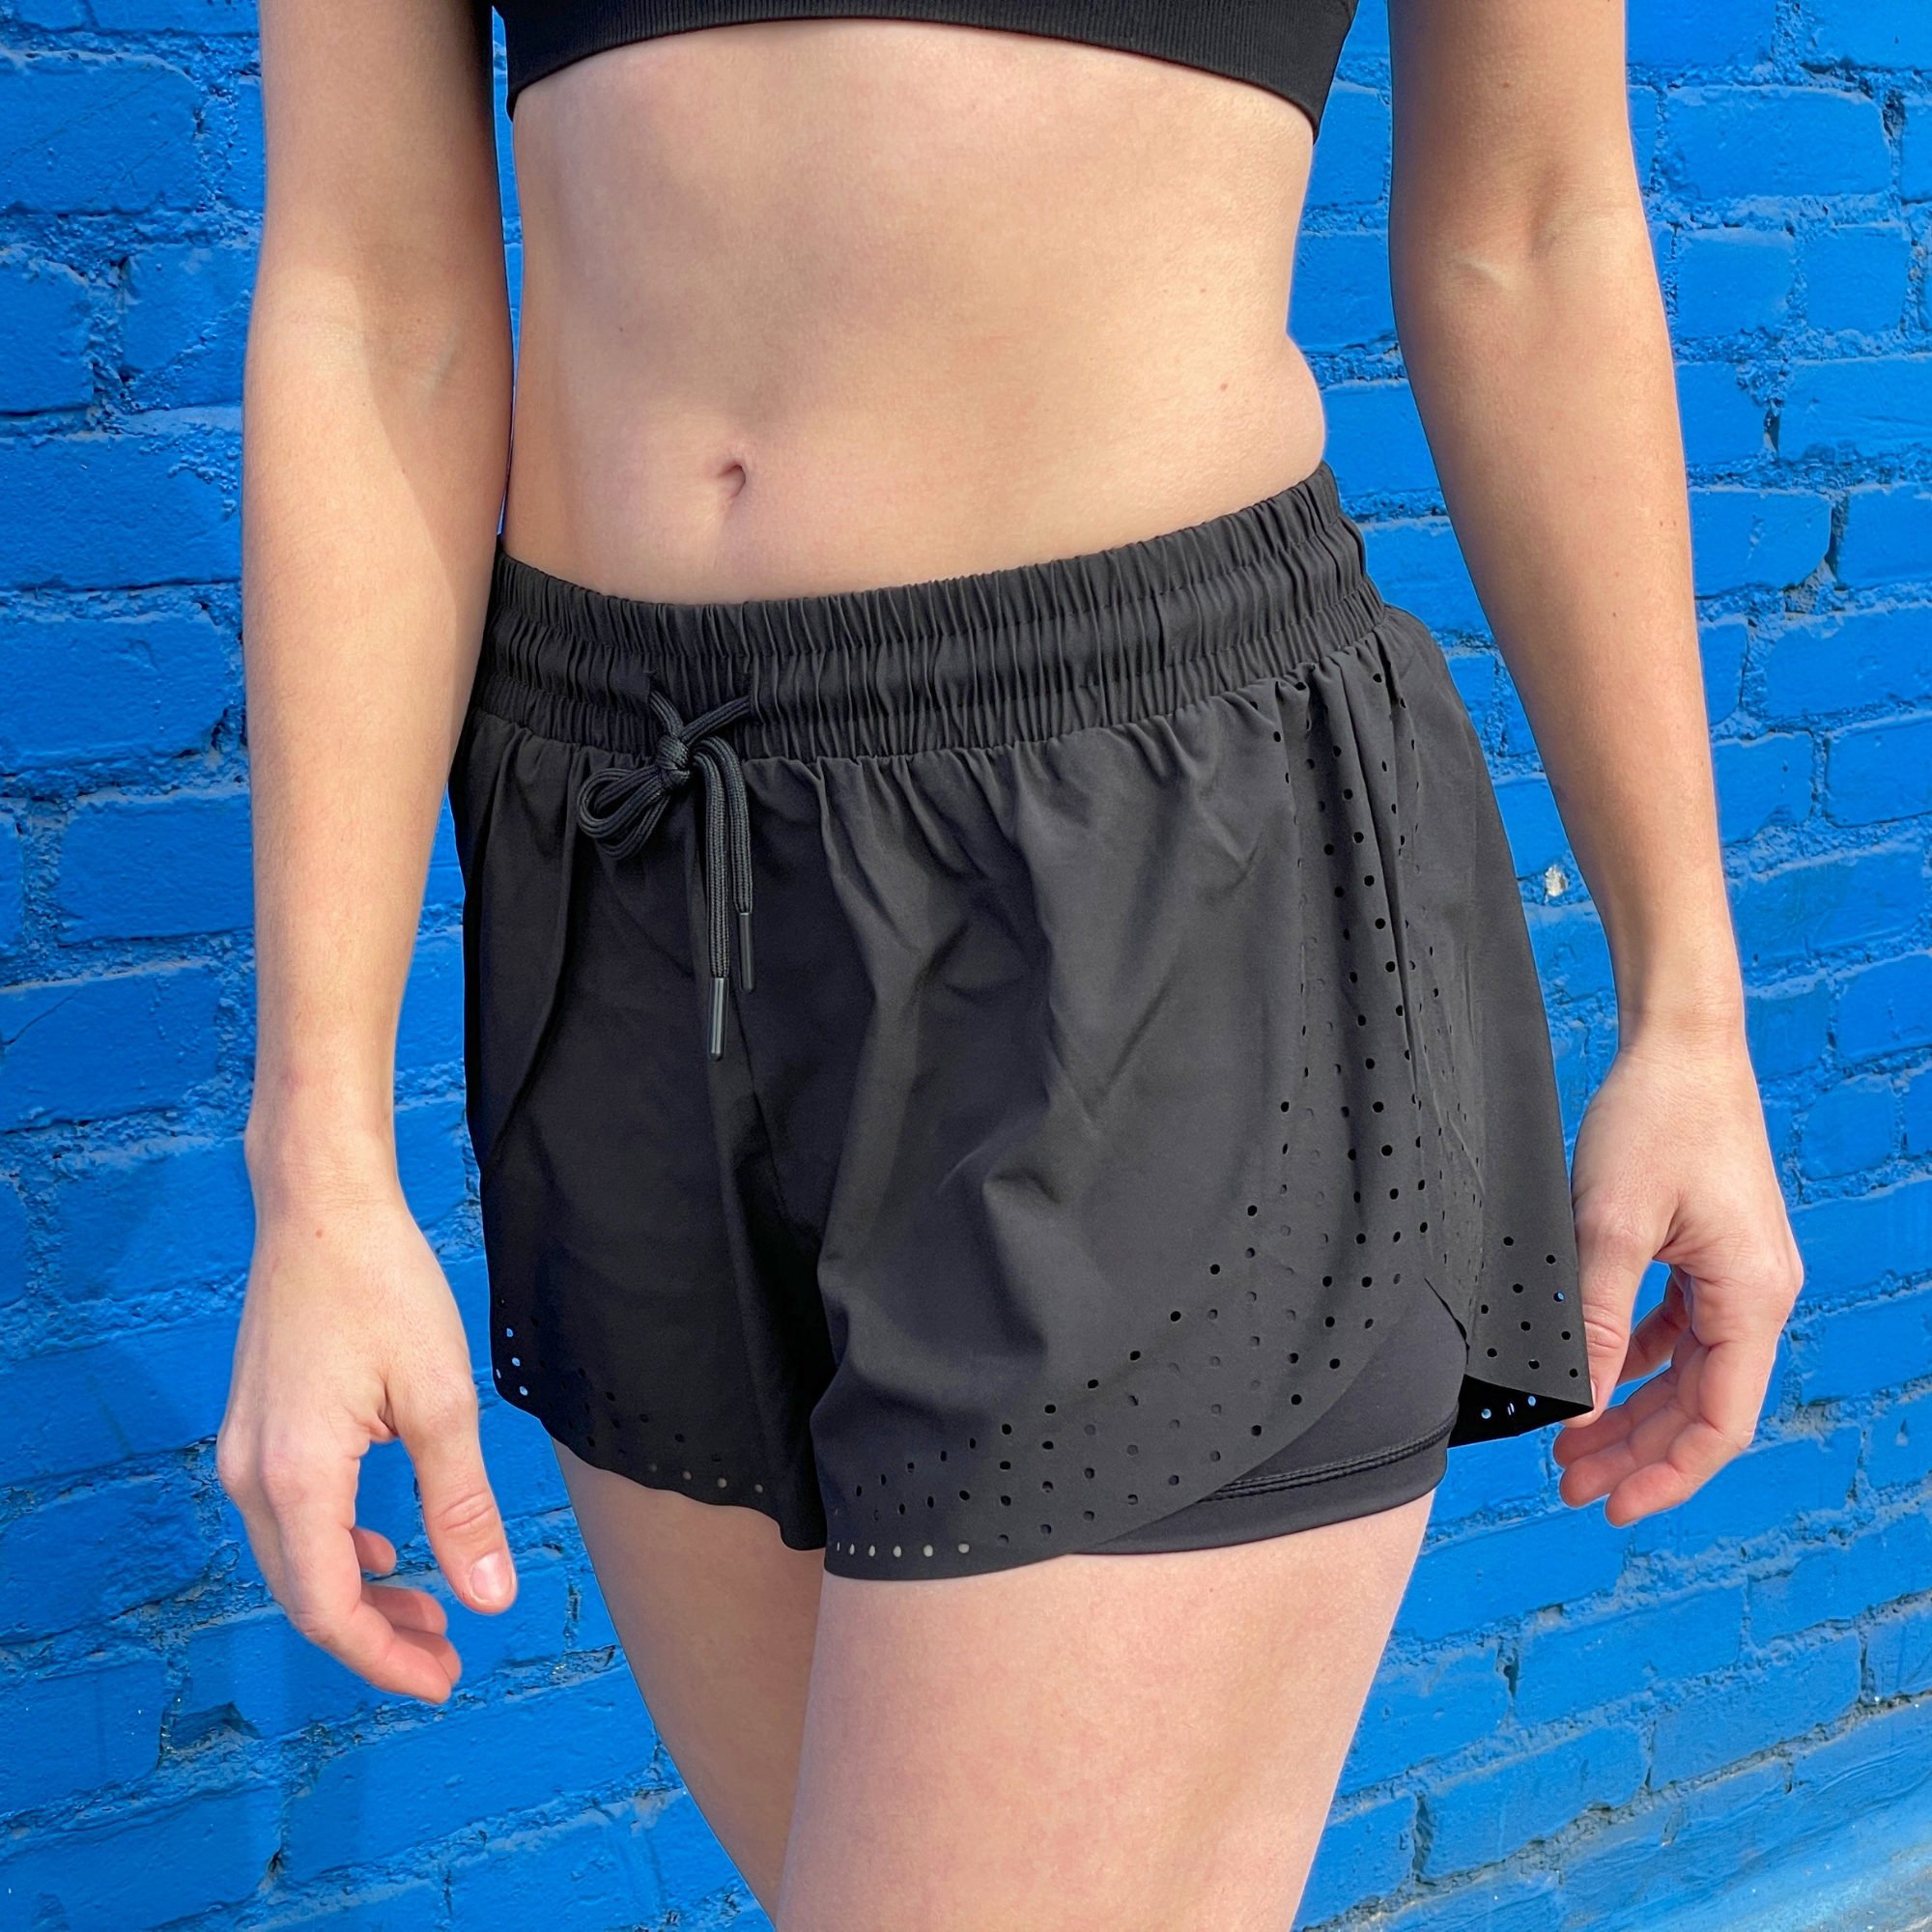 JupiterGear Arielle Athletic Shorts with Built-In Compression Liner for Working Out, Yoga and Running